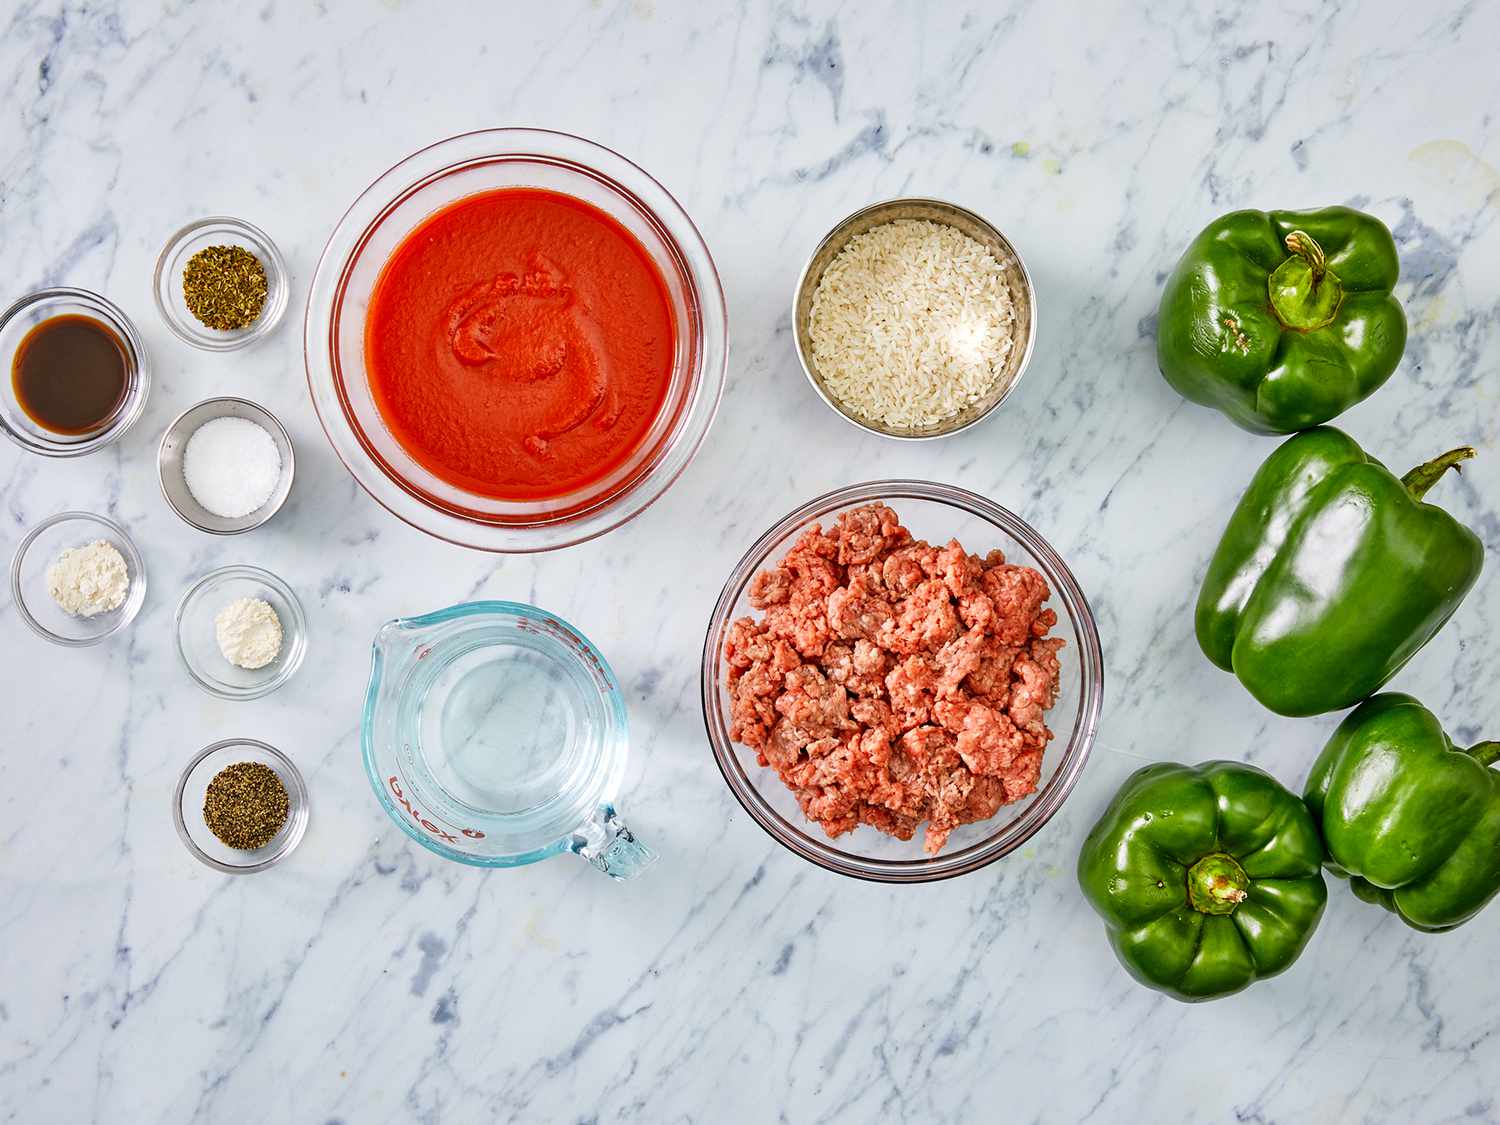 A top down view of all ingredients measured and prepped for stuffed peppers.